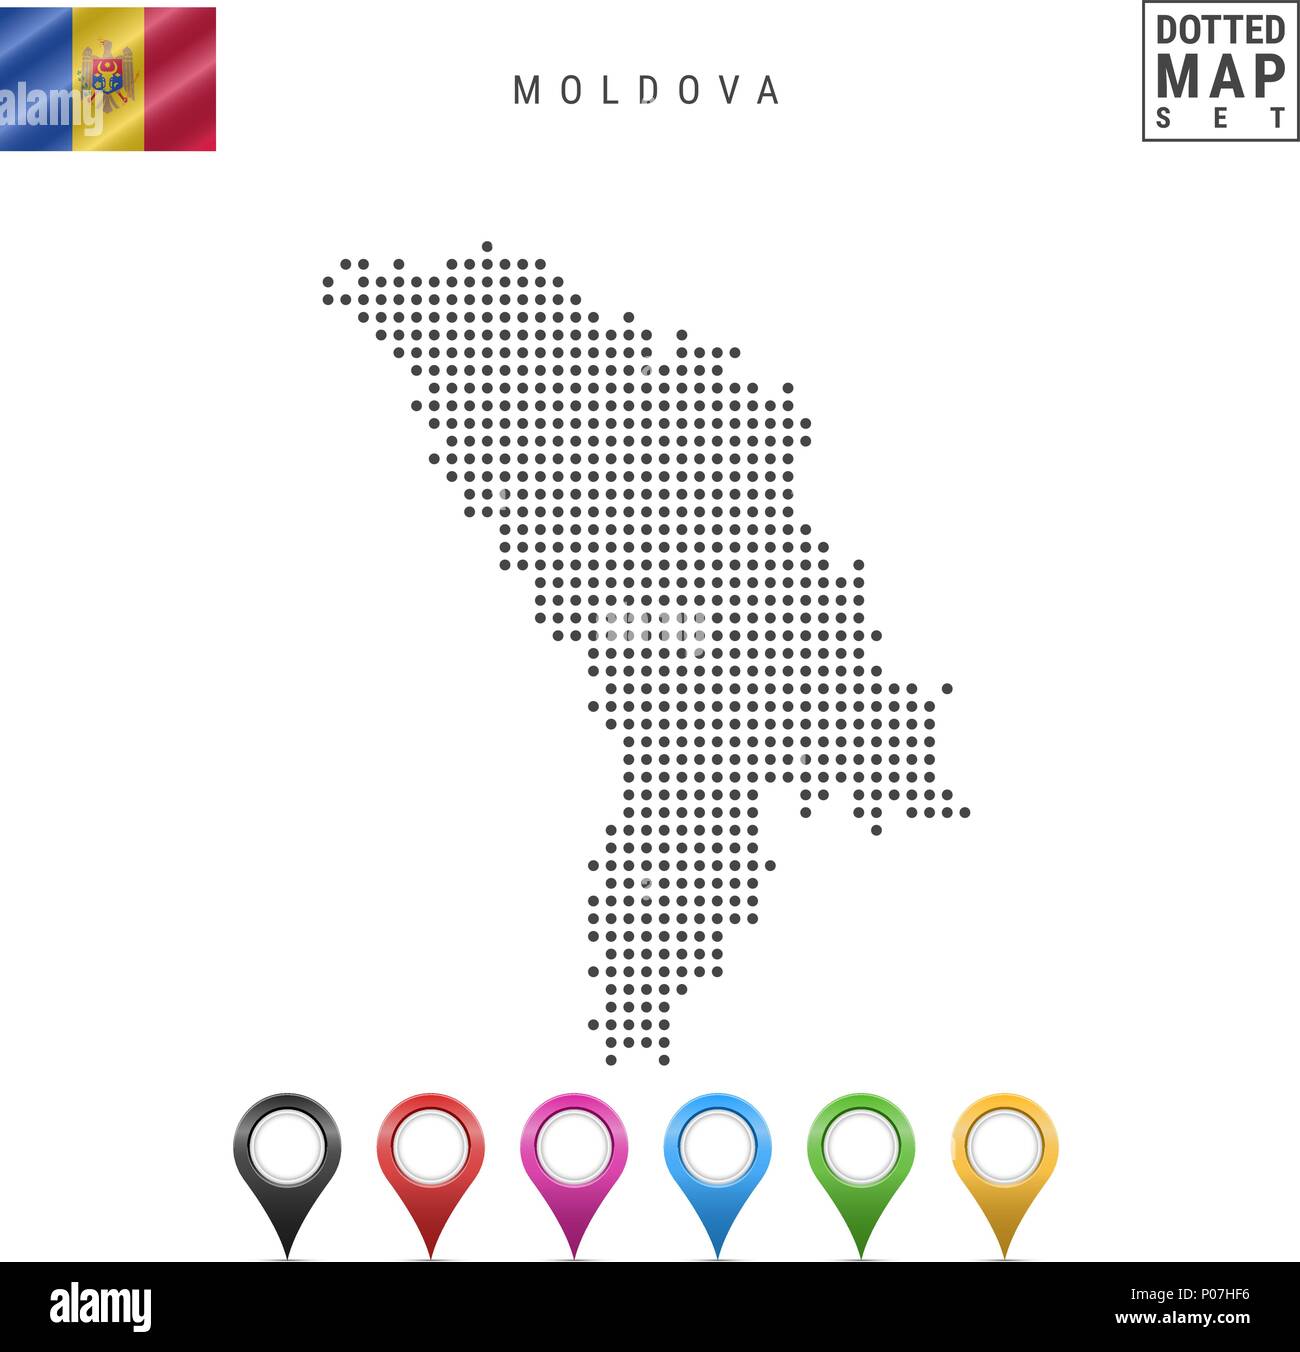 Vector Dotted Map of Moldova. Simple Silhouette of Moldova. National Flag of Moldova. Set of Multicolored Map Markers Stock Vector